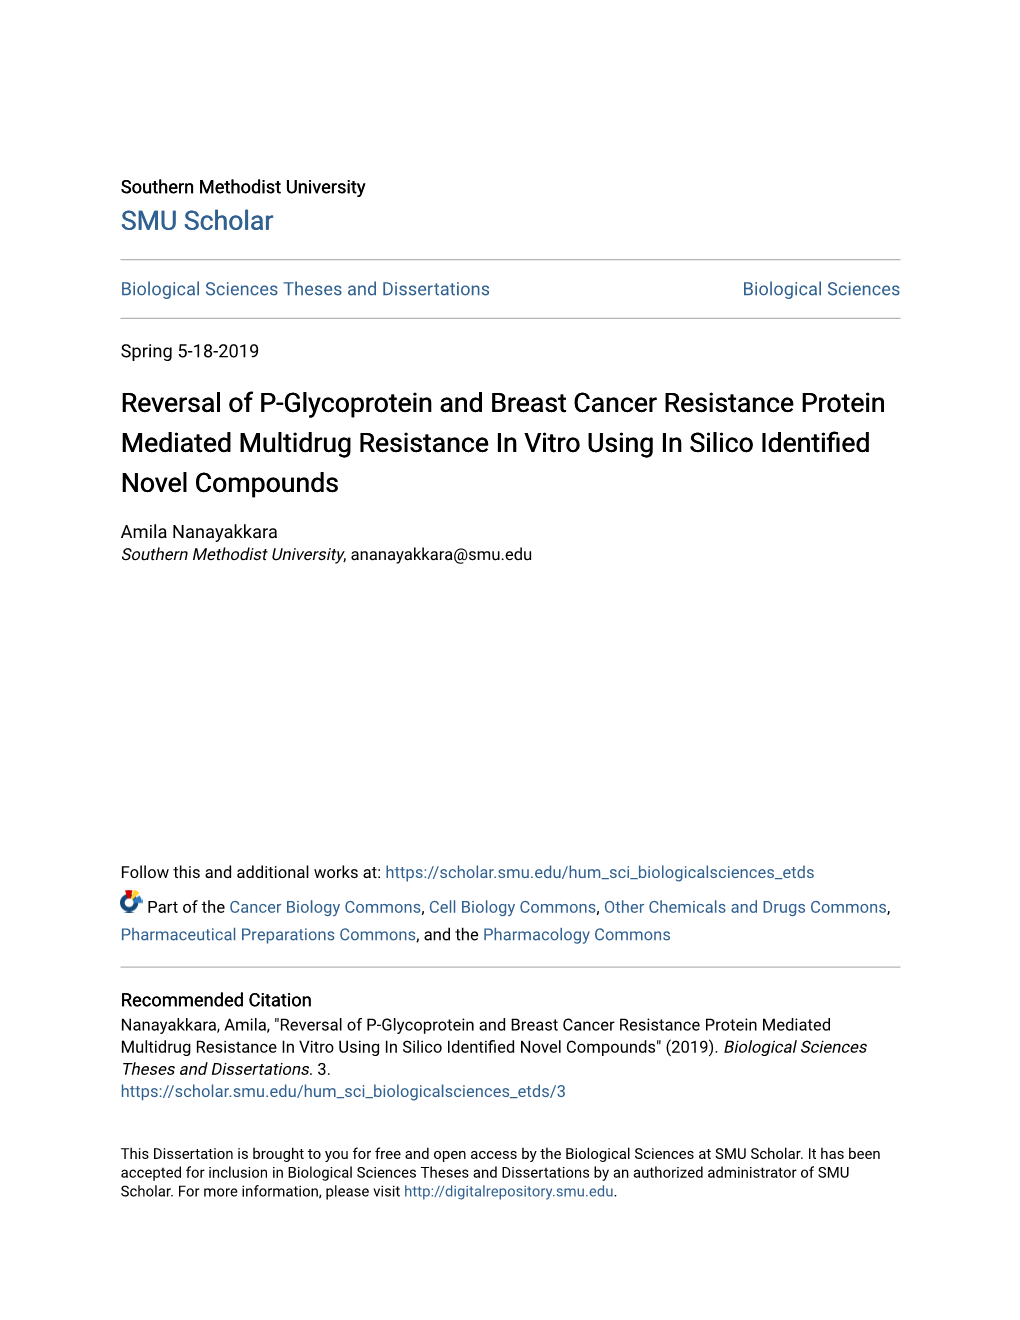 Reversal of P-Glycoprotein and Breast Cancer Resistance Protein Mediated Multidrug Resistance in Vitro Using in Silico Identified Novel Compounds